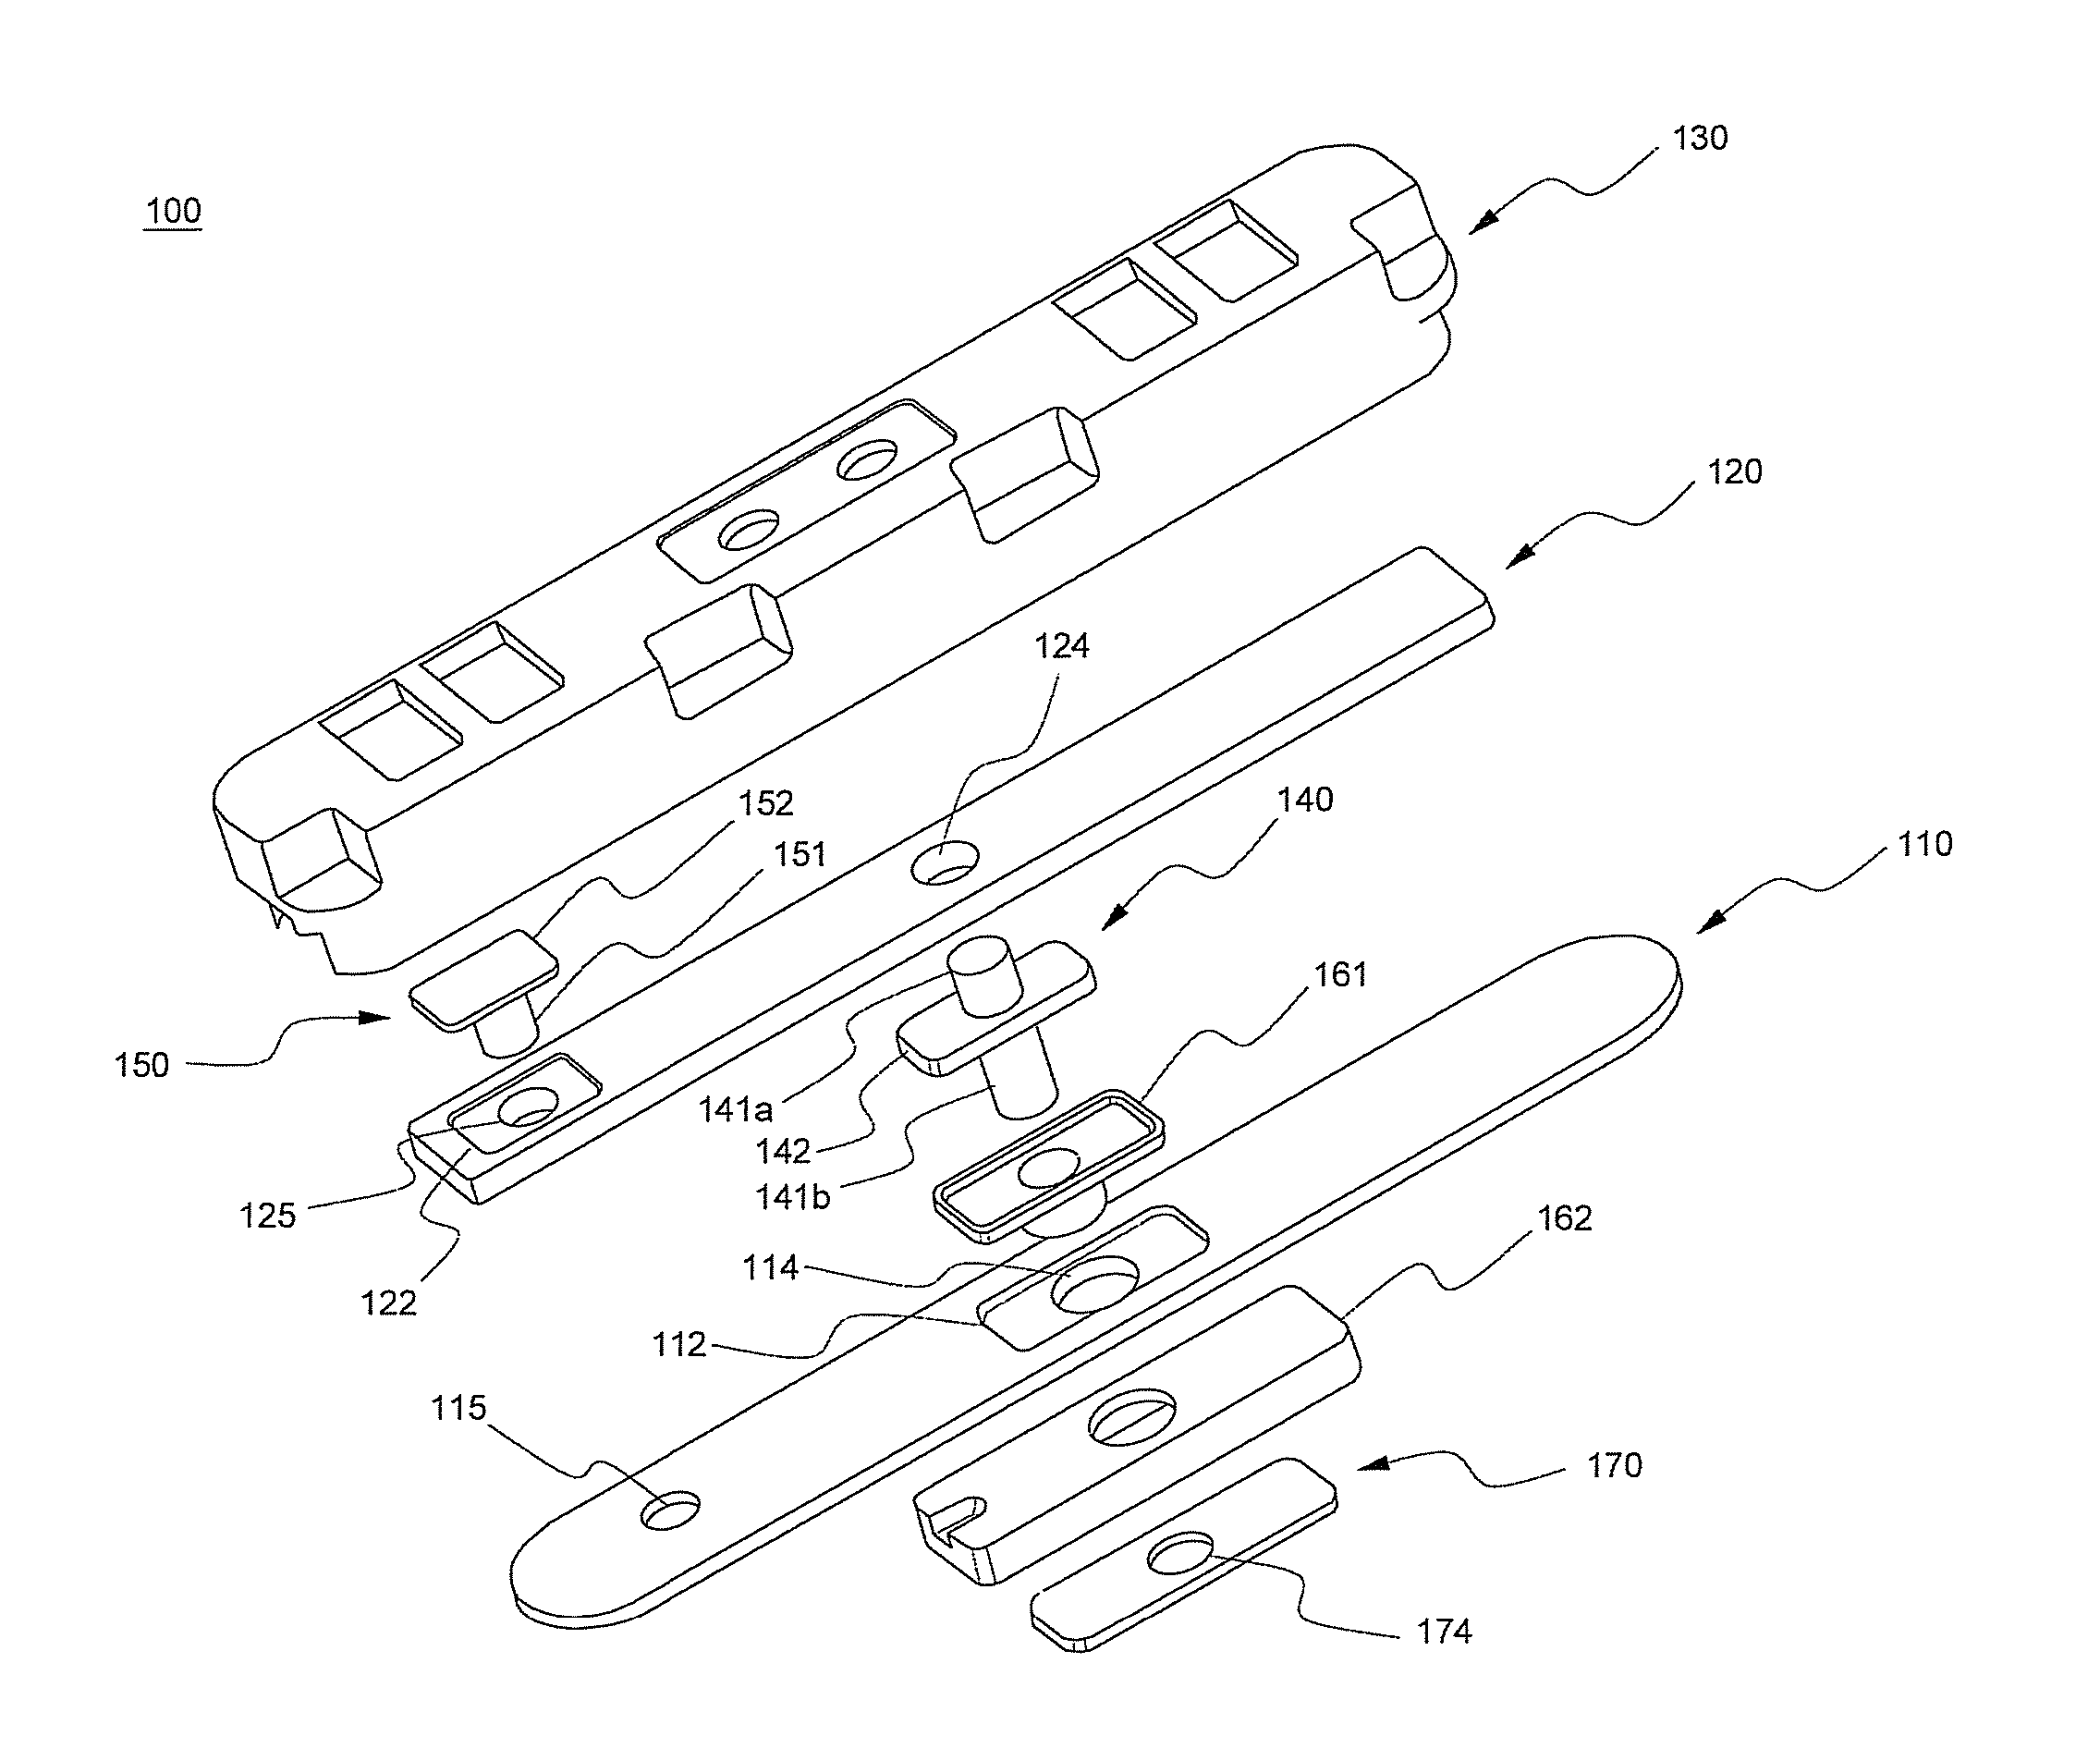 No-welding type battery pack using forced-inserting type rivet